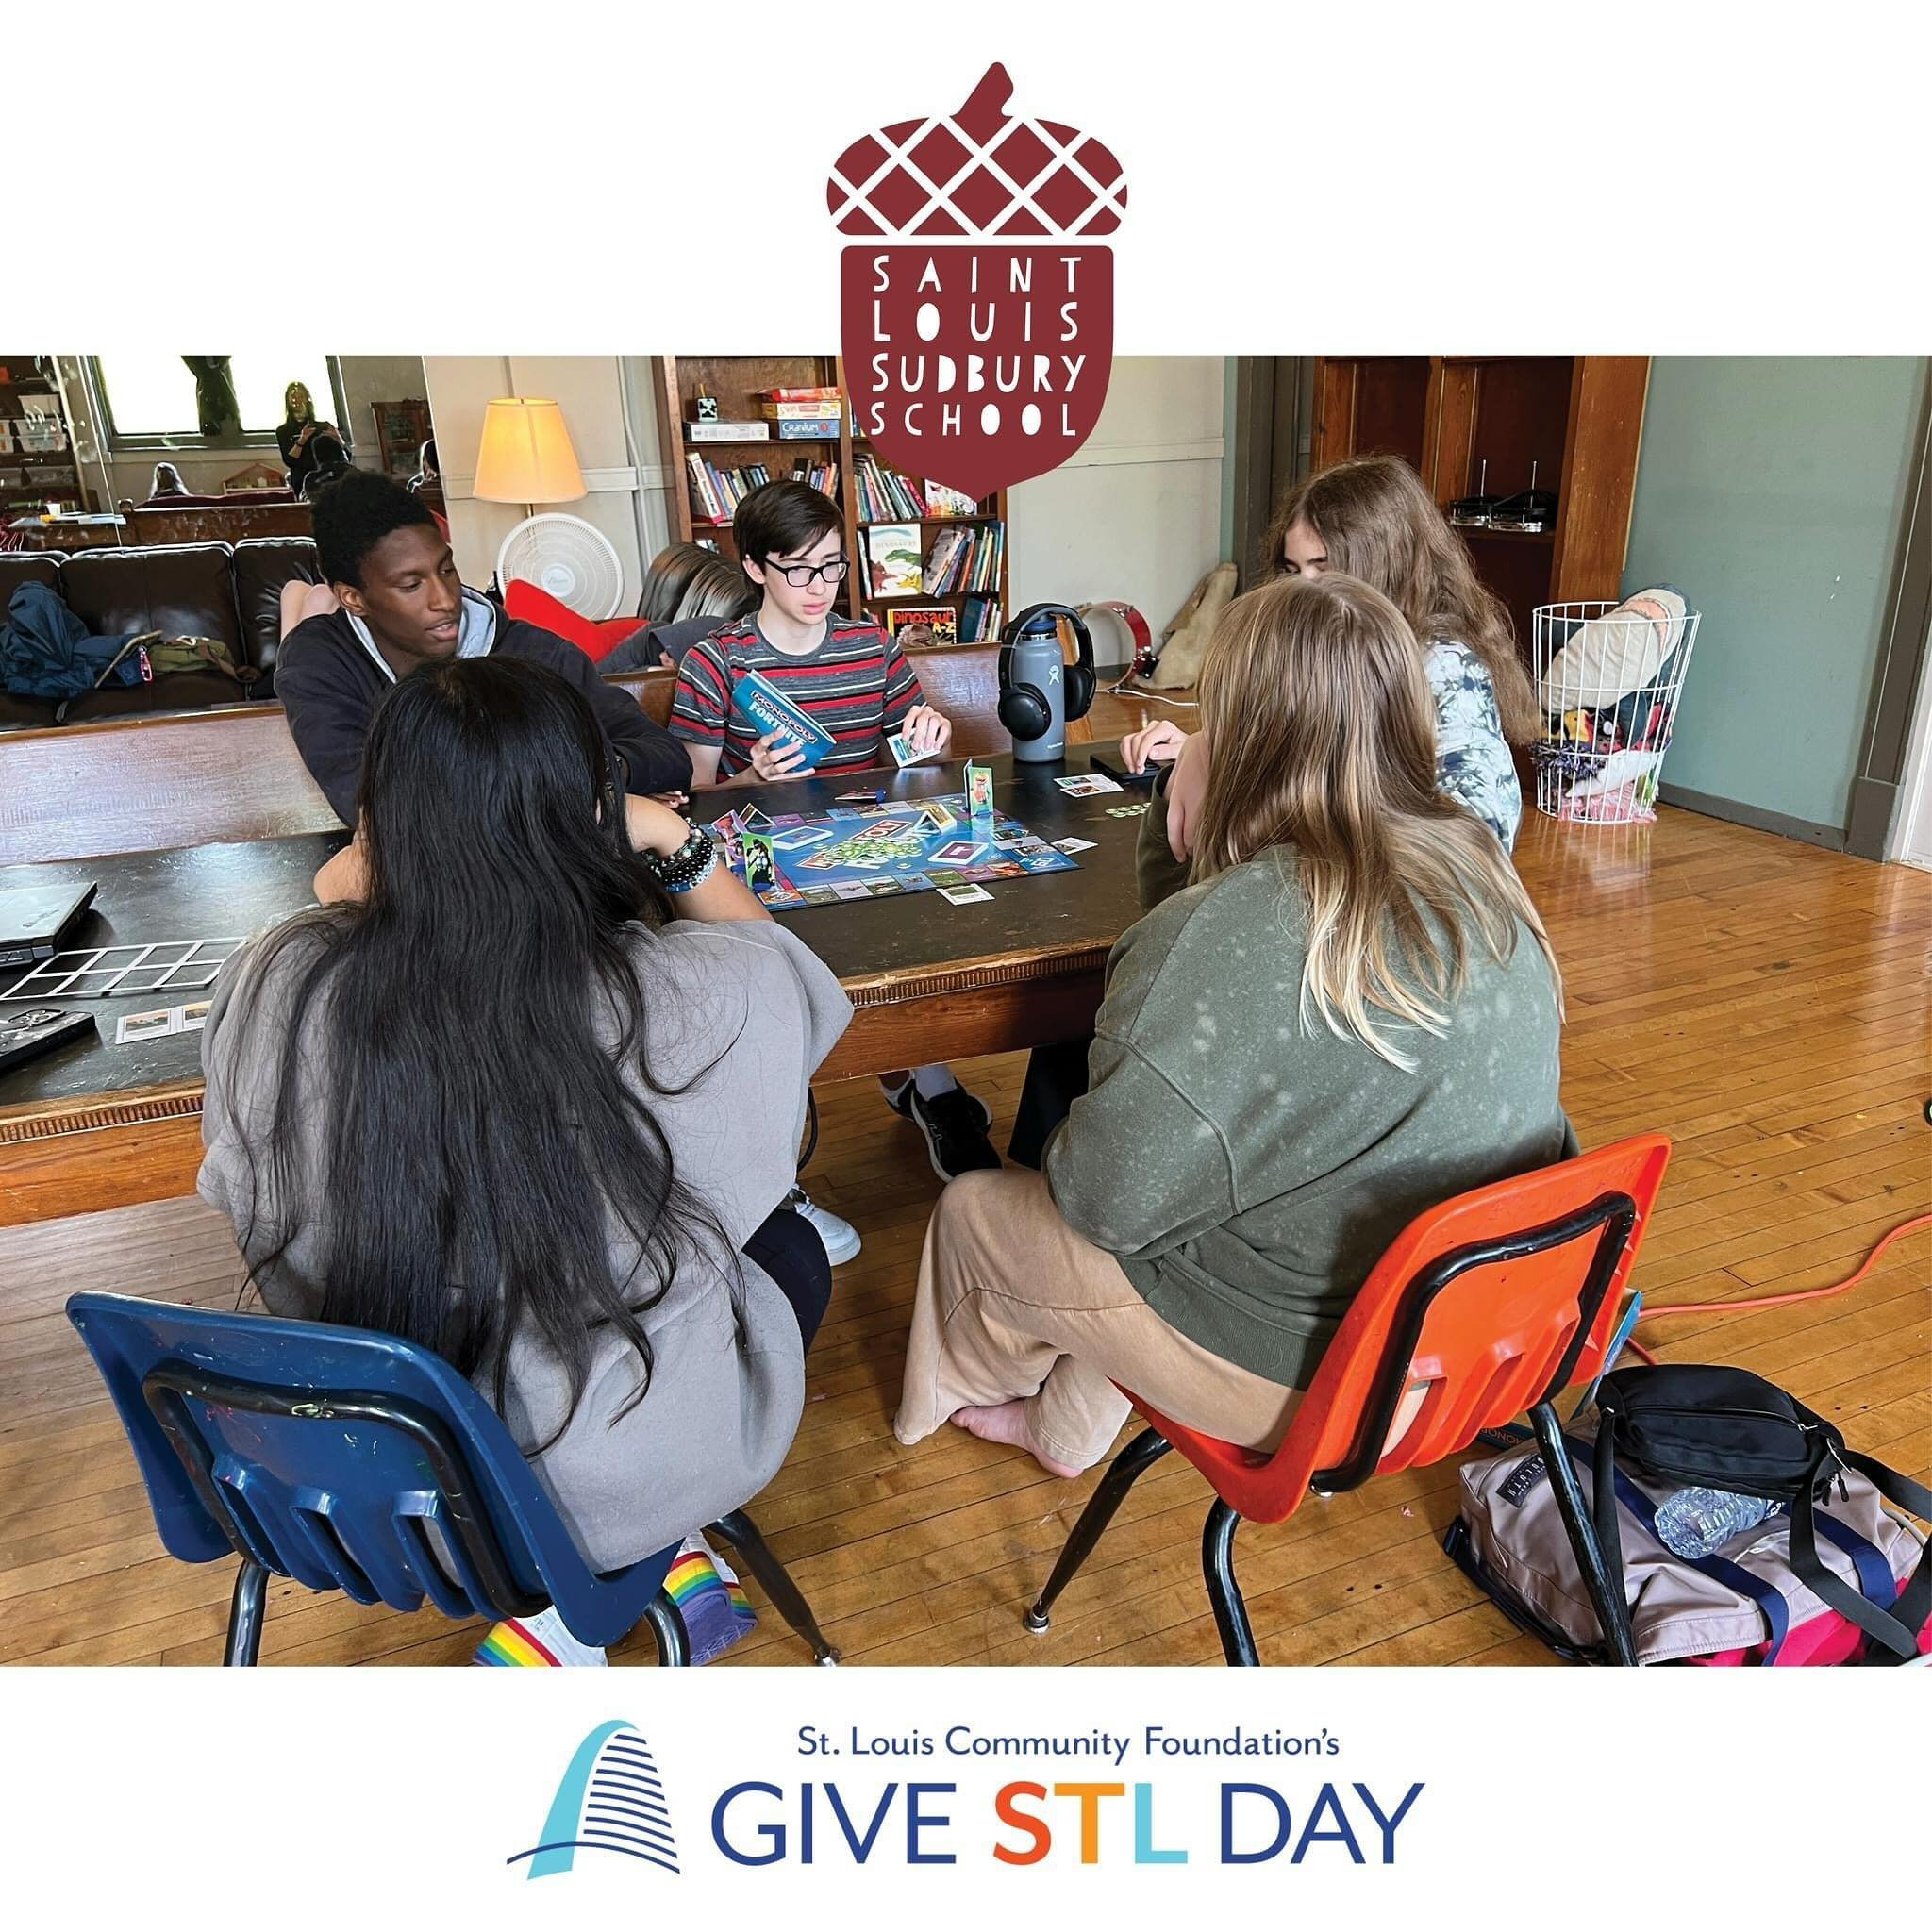 It&rsquo;s Give STL Day! Powered by the St. Louis Community Foundation (@stlouisgives), Give STL Day is a special opportunity for every St. Louisan to collectively support nonprofits that do so much for our community. Today, Saint Louis Sudbury Schoo